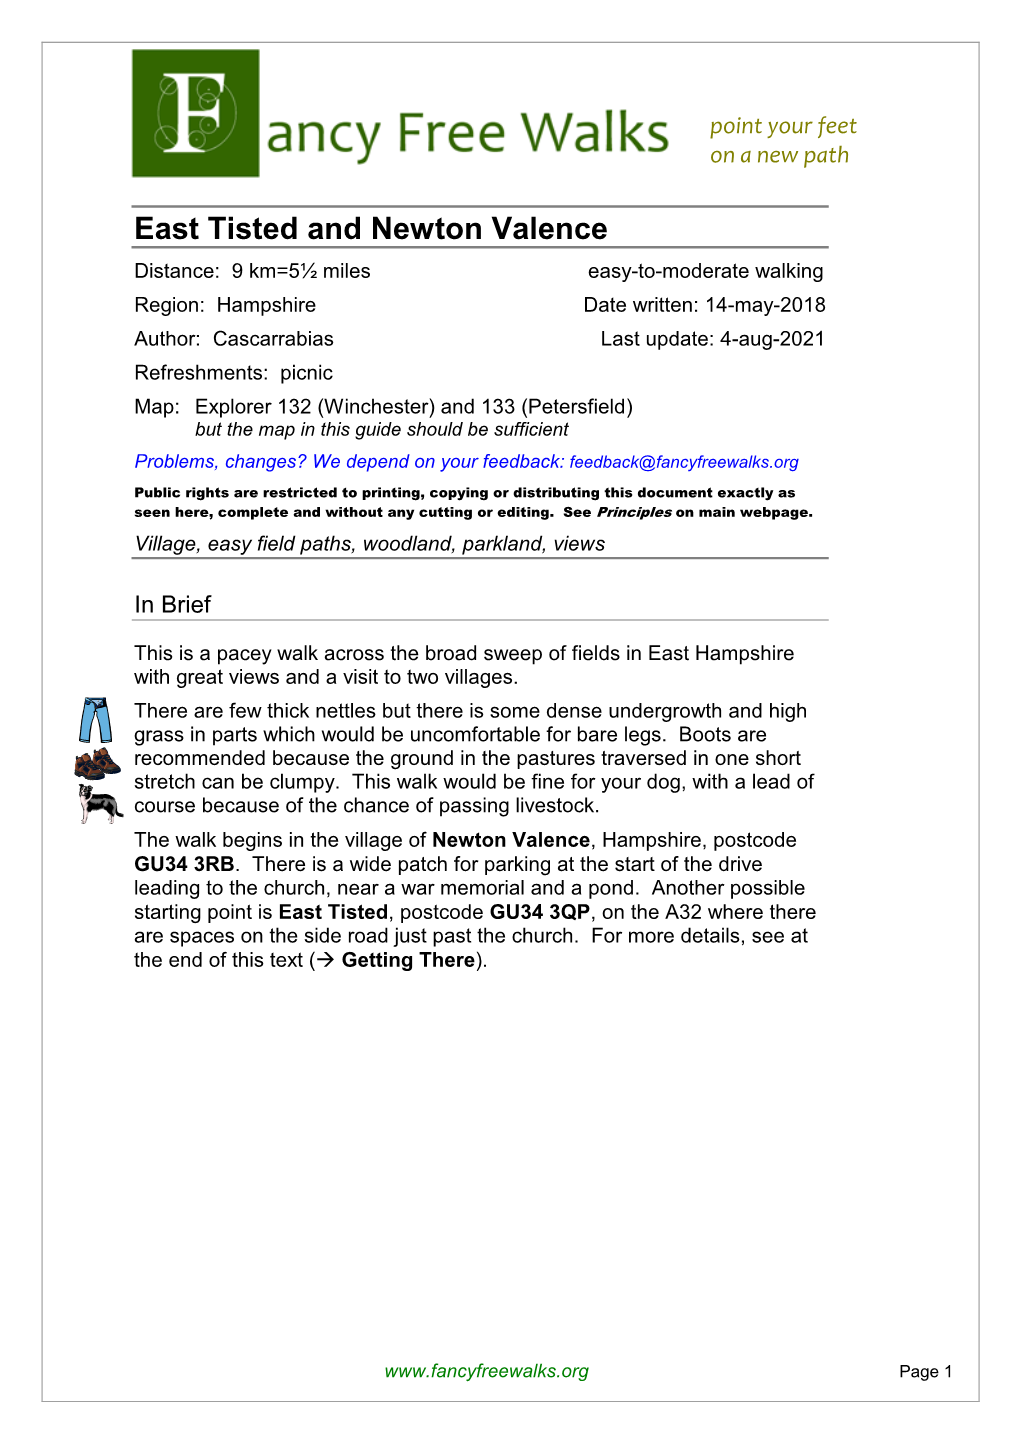 East Tisted and Newton Valence